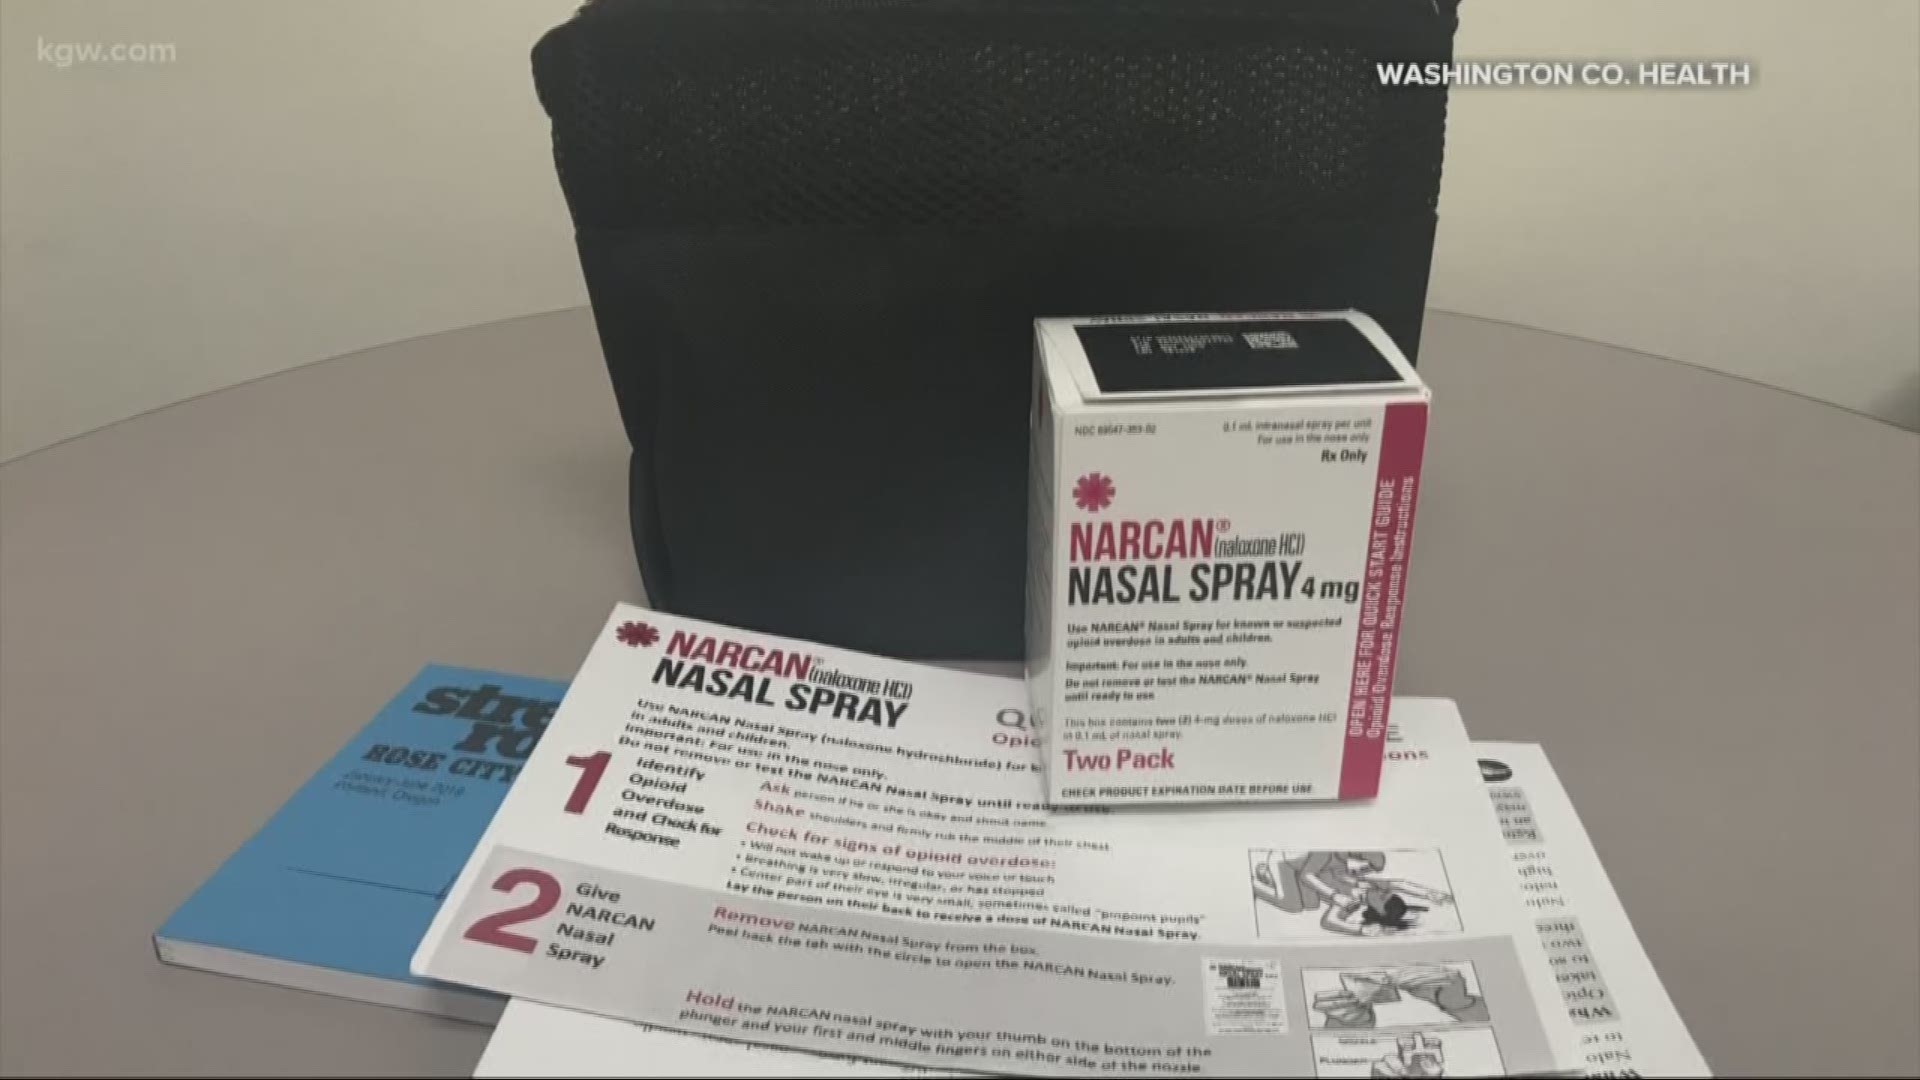 Washington County Sheriff’s Office will begin distributing naloxone kits to people with the highest risk of an opioid overdose.